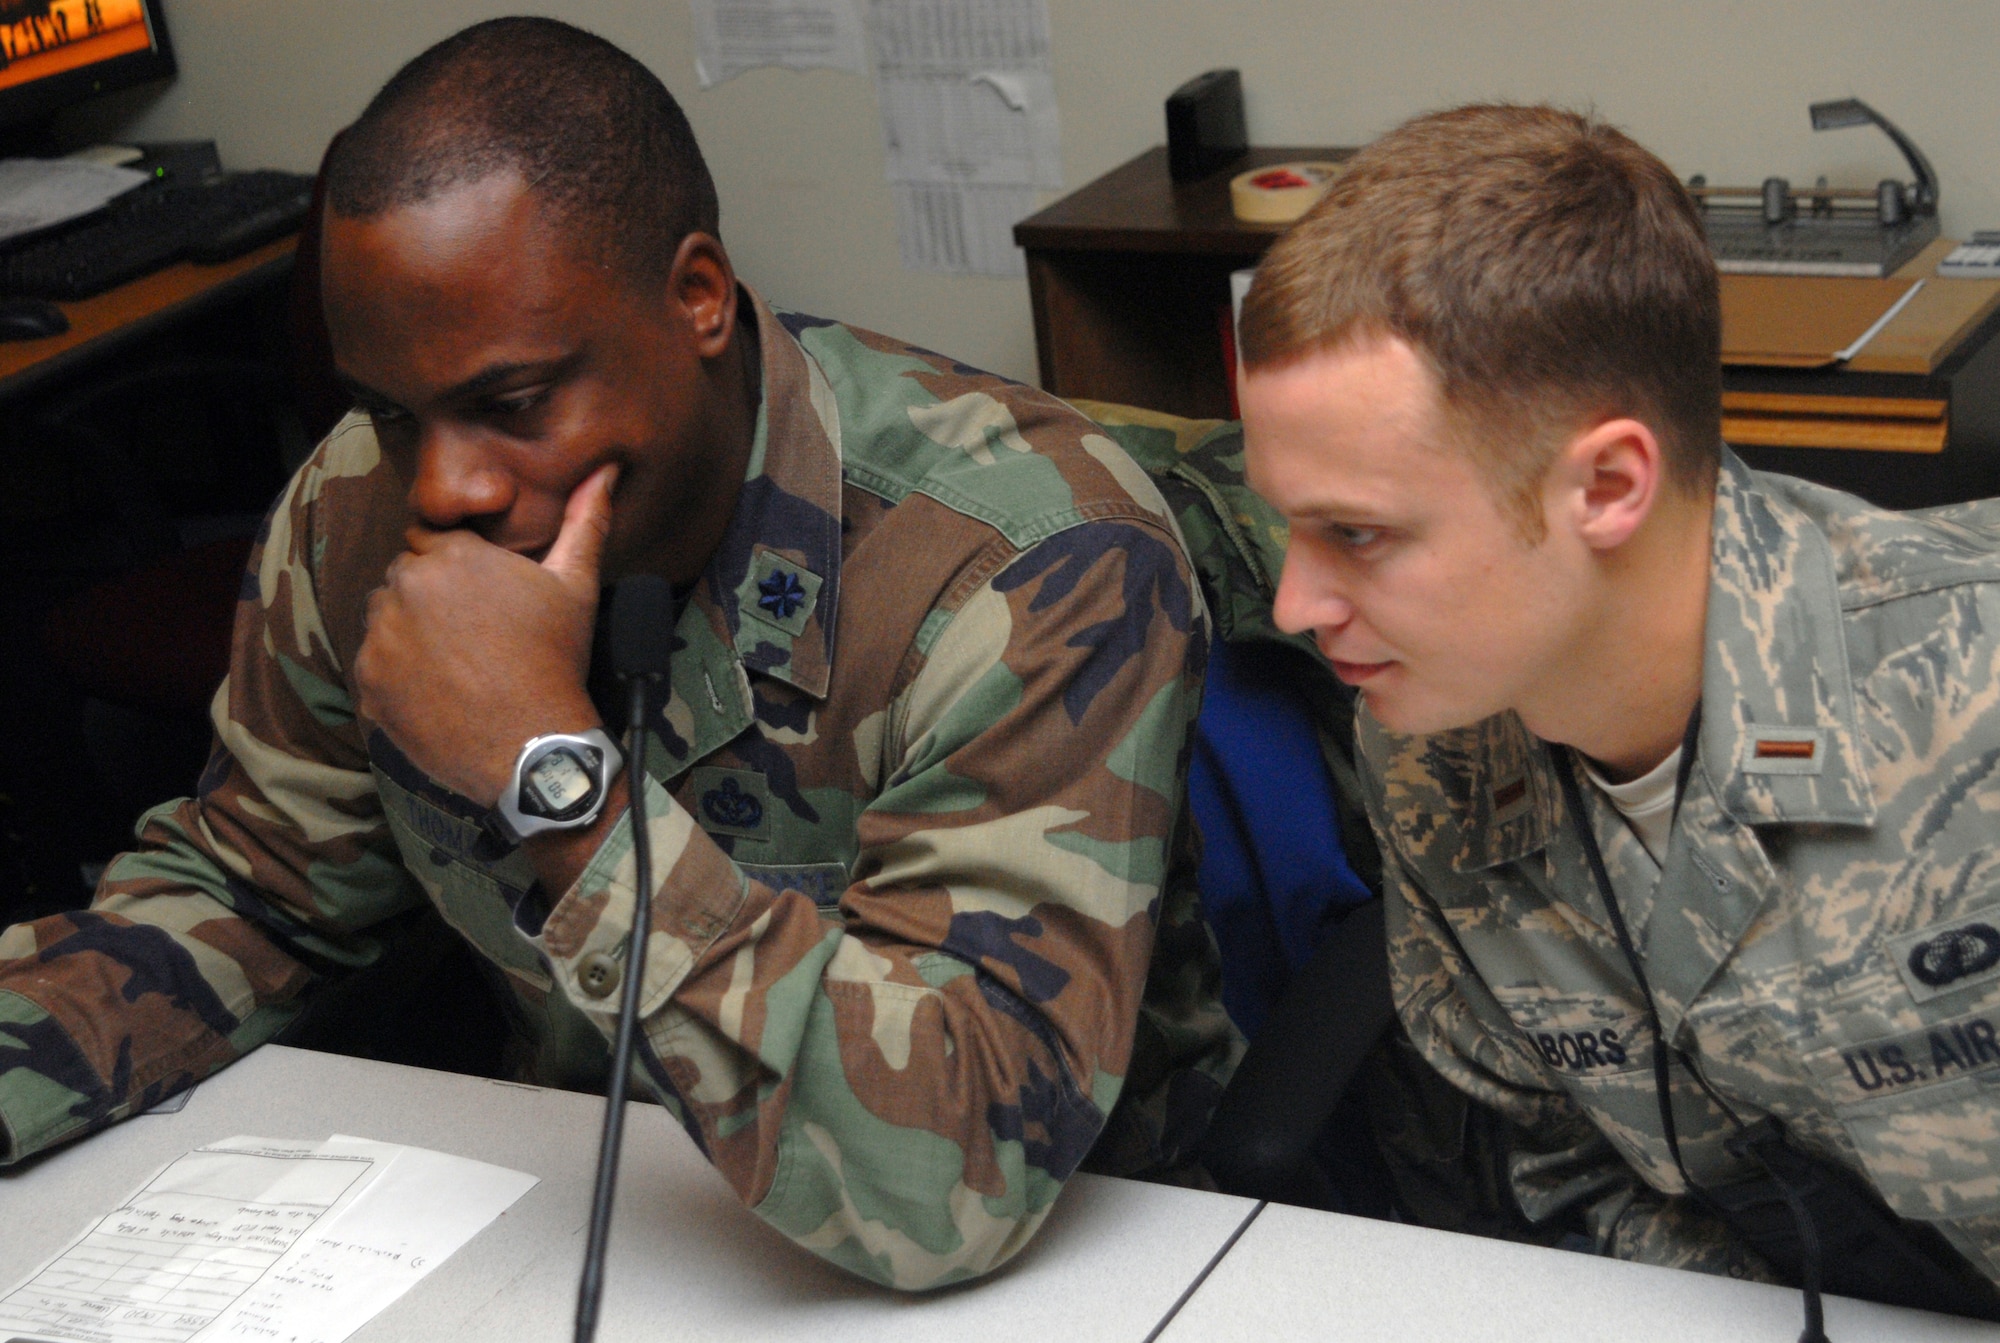 Lt. Col. Dwayne Thomas, the Emergency Operations Center manager and 2nd Lt. Joshua Nabors, 18th Contracting Squadron, reviews wing information inside the EOC during Local Operational Readiness Exercise Beverly High 08-3 at Kadena Air Base, Japan, Jan. 7, 2007. The 18th Wing exercise from Jan. 7 to 11 tests the wing's ability to respond in contingency situations. (U.S. Air Force photo/Staff Sgt. Christopher Marasky)